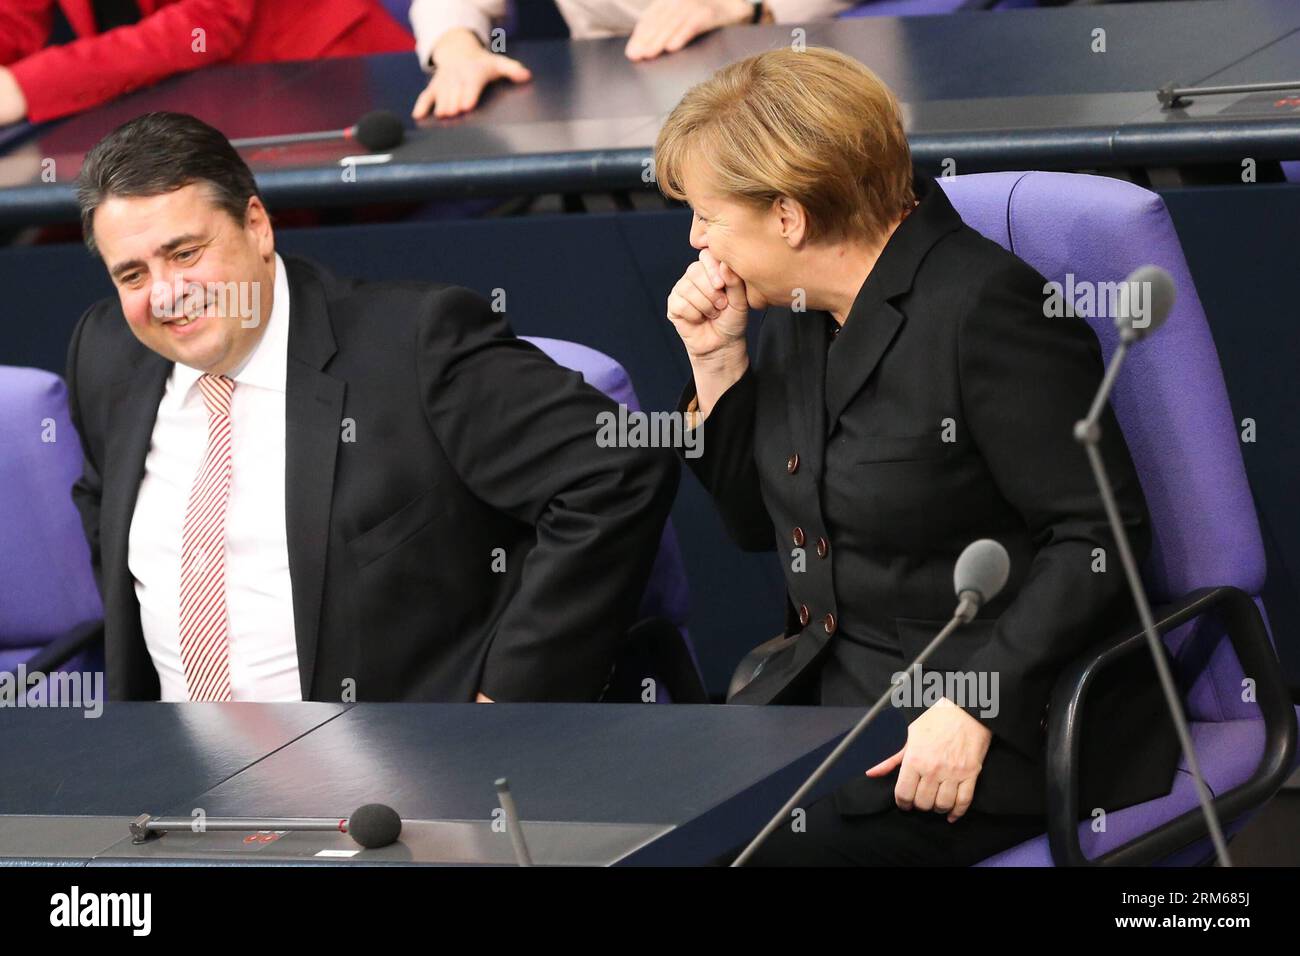 (131217) -- BERLIN, Dec. 17, 2013 (Xinhua) -- German Chancellor Angela Merkel (R) and German Vice-Chancellor and Minister of Economics and Energy Sigmar Gabriel attend the meeting of Bundestag, Germany s lower house of parliament, in Berlin, Germany on Dec. 17, 2013. German new government headed by Chancellor Angela Merkel was sworn into office on Tuesday to rule Europe s biggest economy for the next four years. Cabinet ministers of the new coalition government, are formed by Merkel s Christian Democratic Union (CDU), its Bavarian sister party Chrisitian Social Union (CSU), and the Social Demo Stock Photo